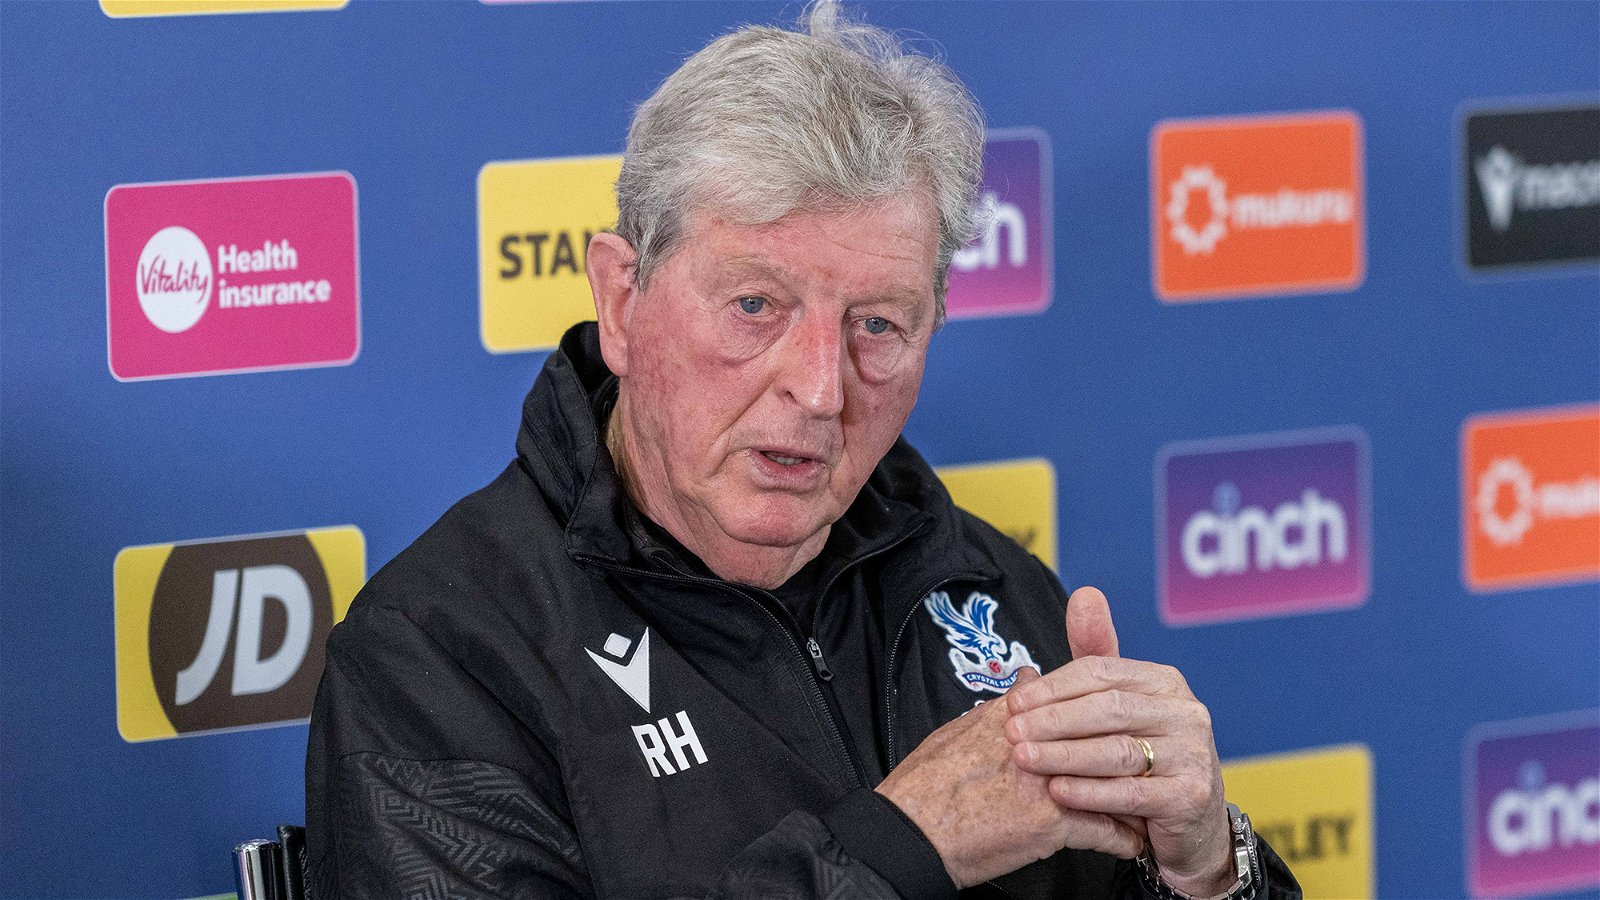 Roy Hodgson press conference on Friday – Ahead of facing Newcastle United  at St James' Park – NUFC The Mag